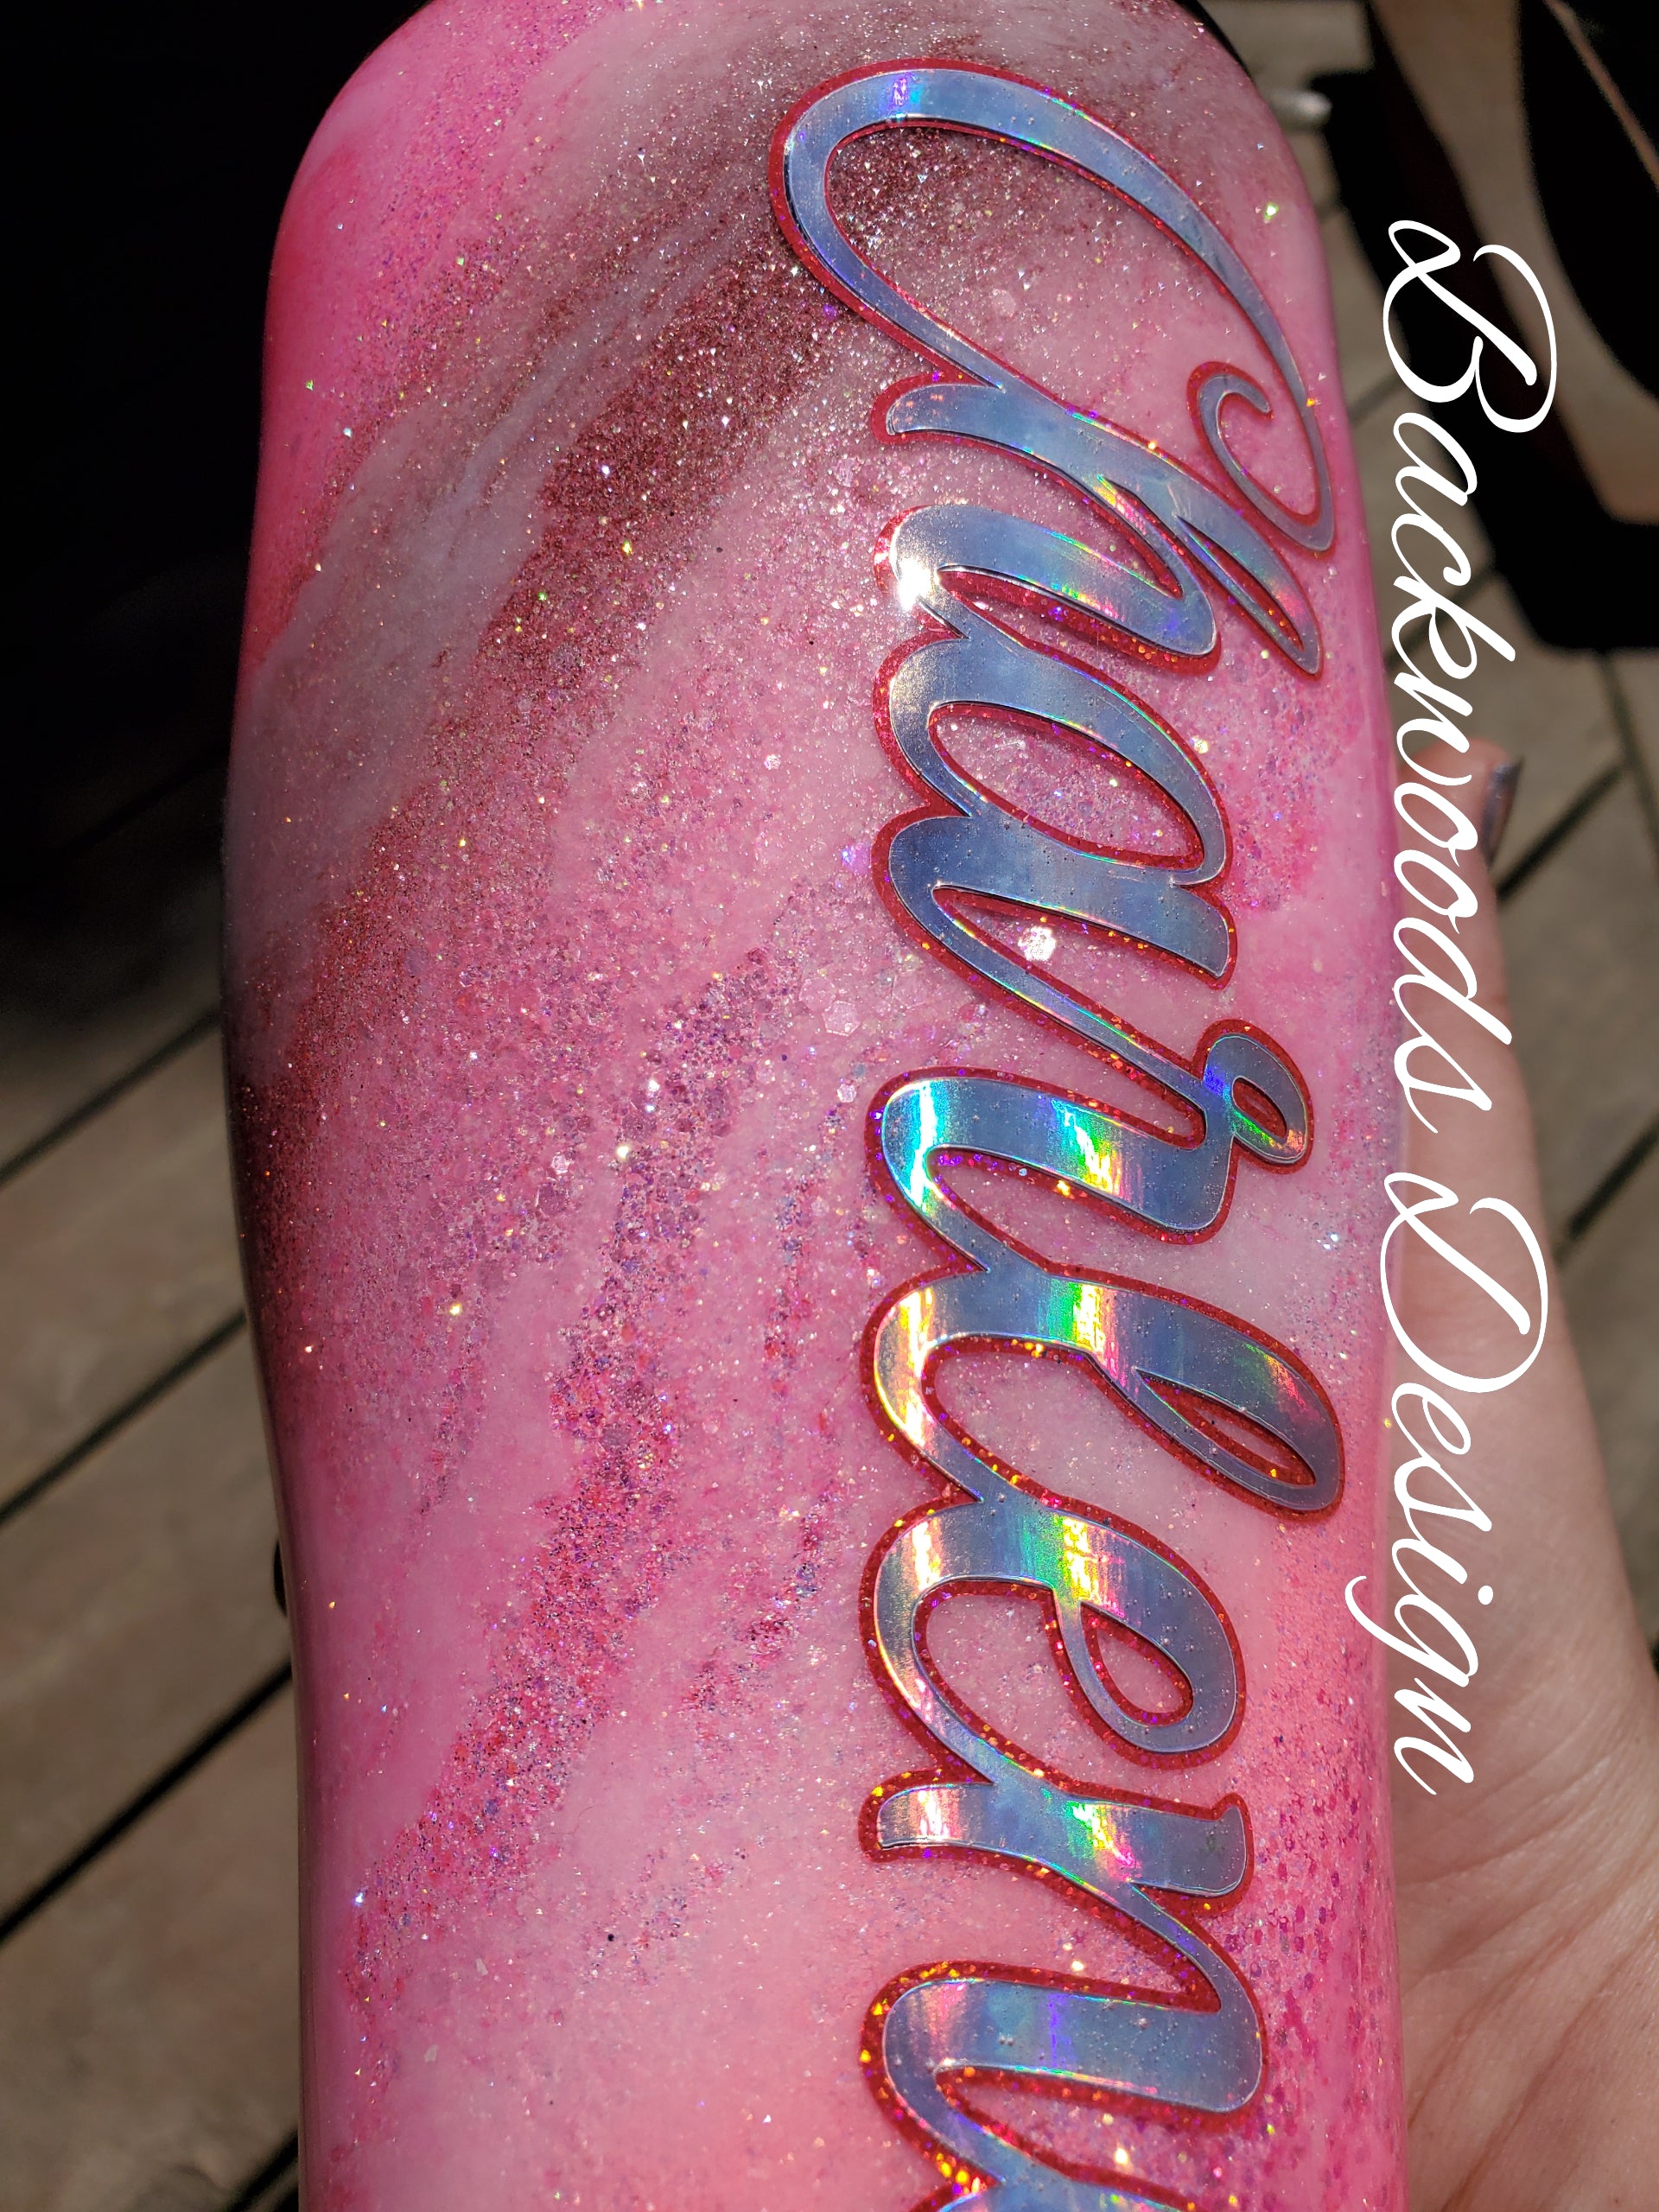 24 oz. Curved Tumbler with Handle (MULTI COLOR SWIRL with GLITTER)